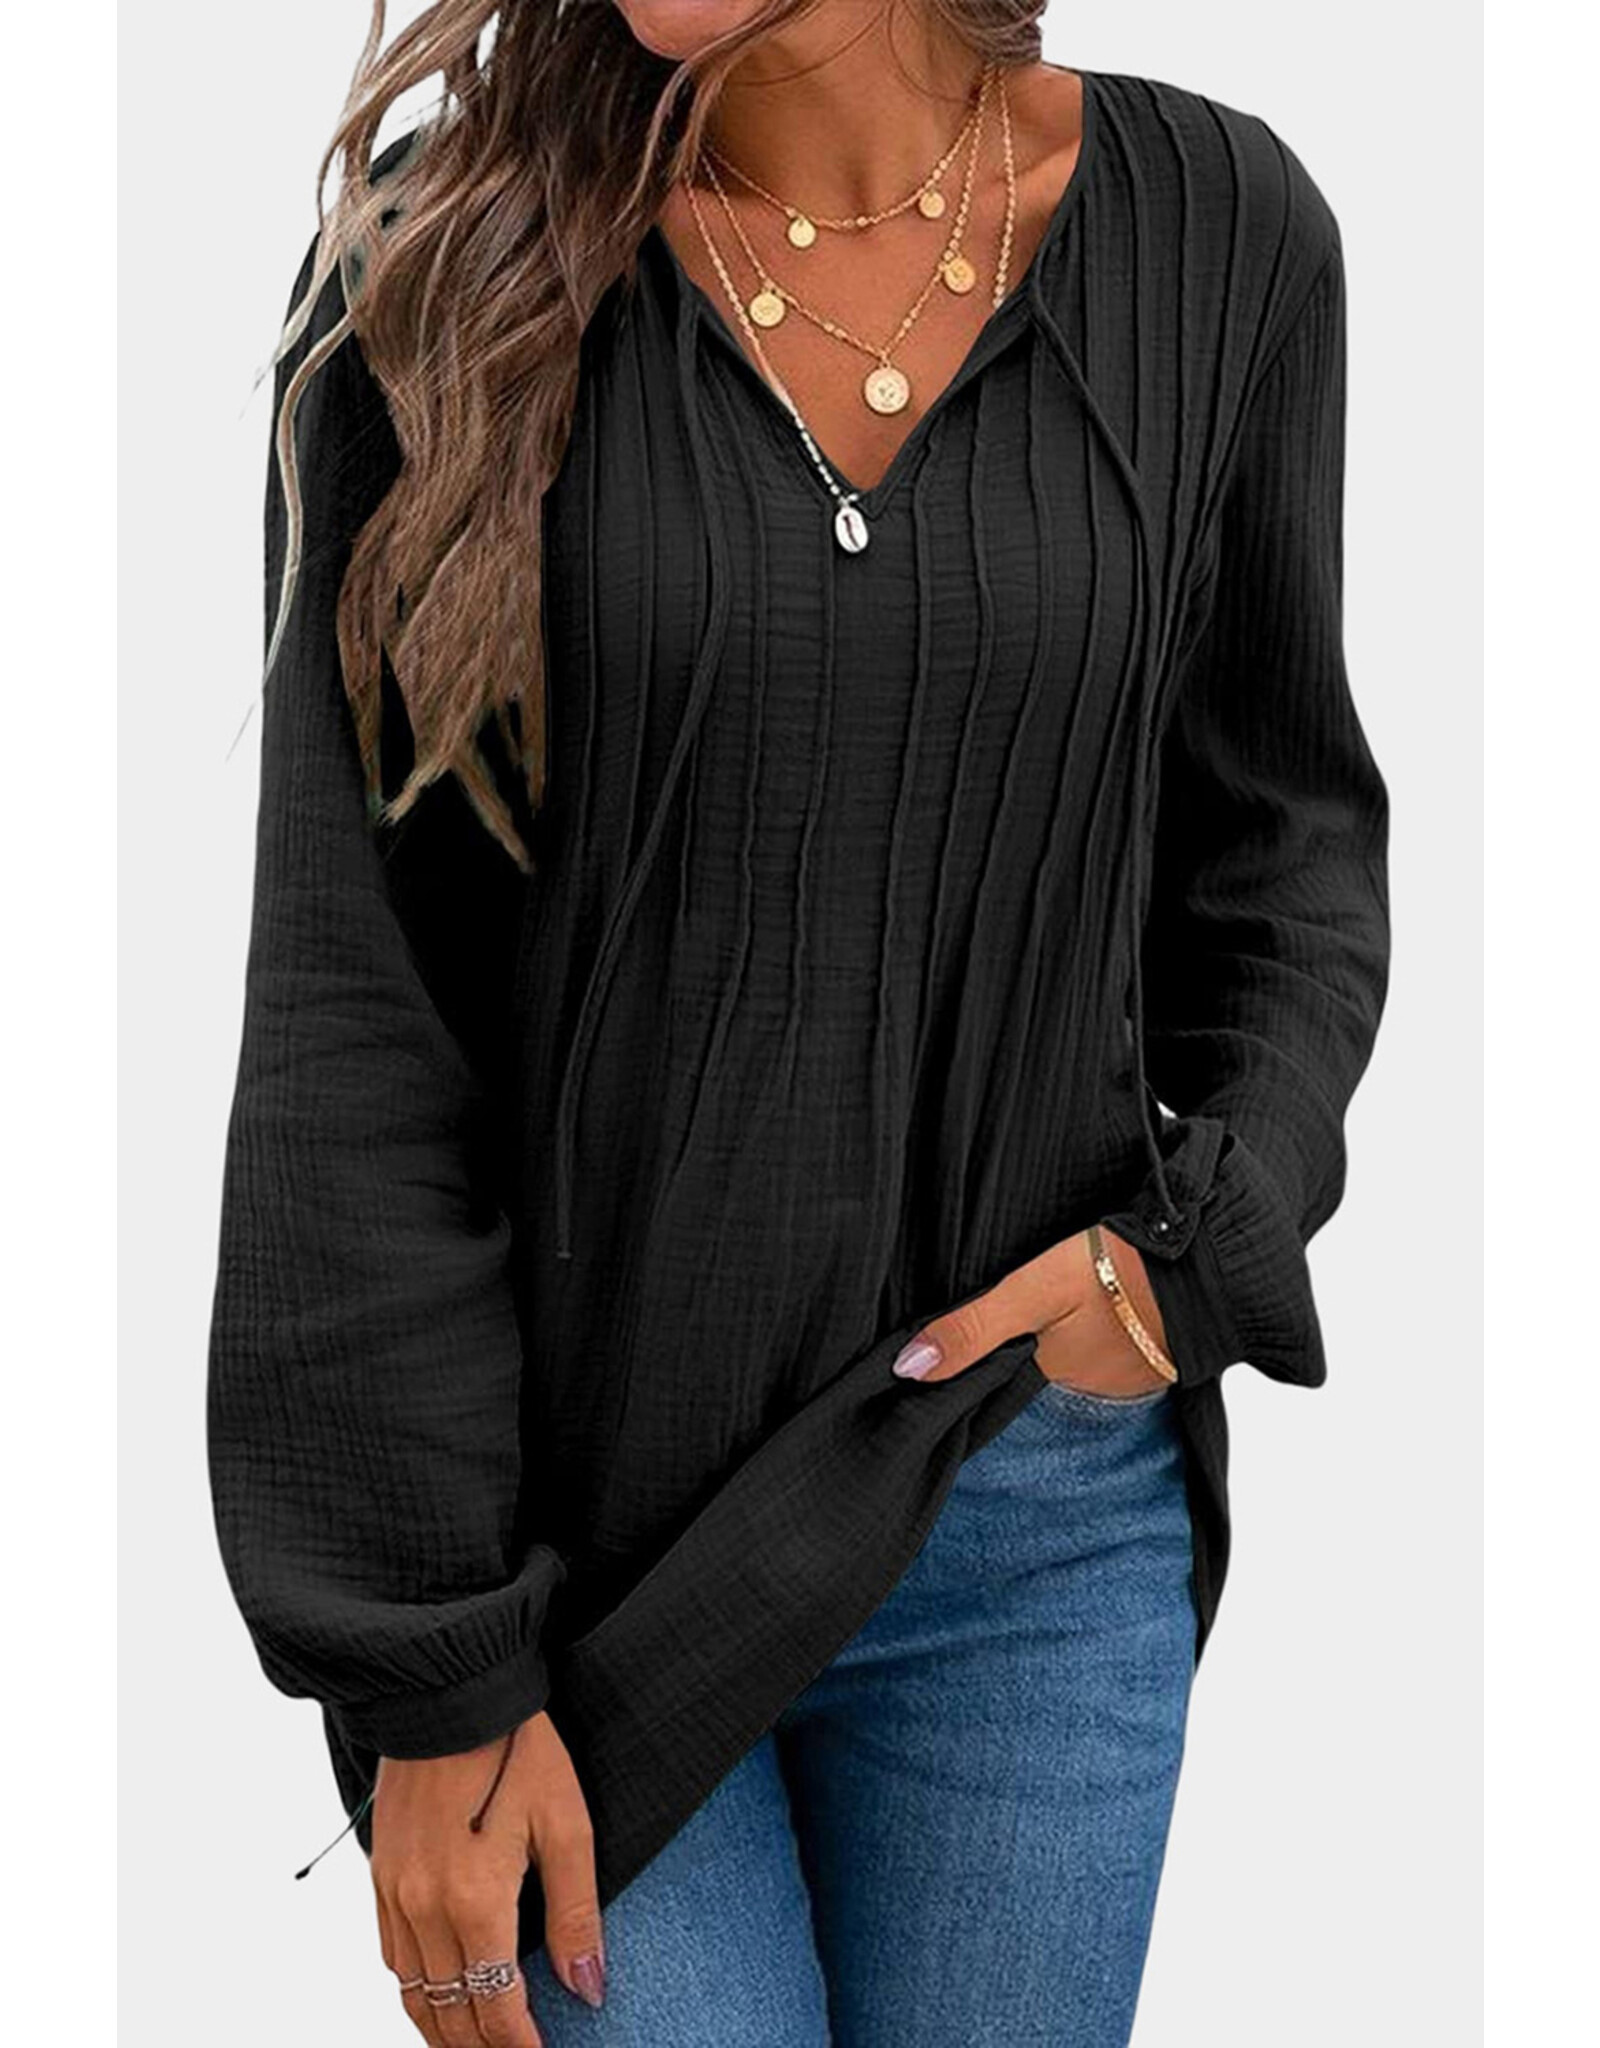 LATA Casual Pleated Textured Top